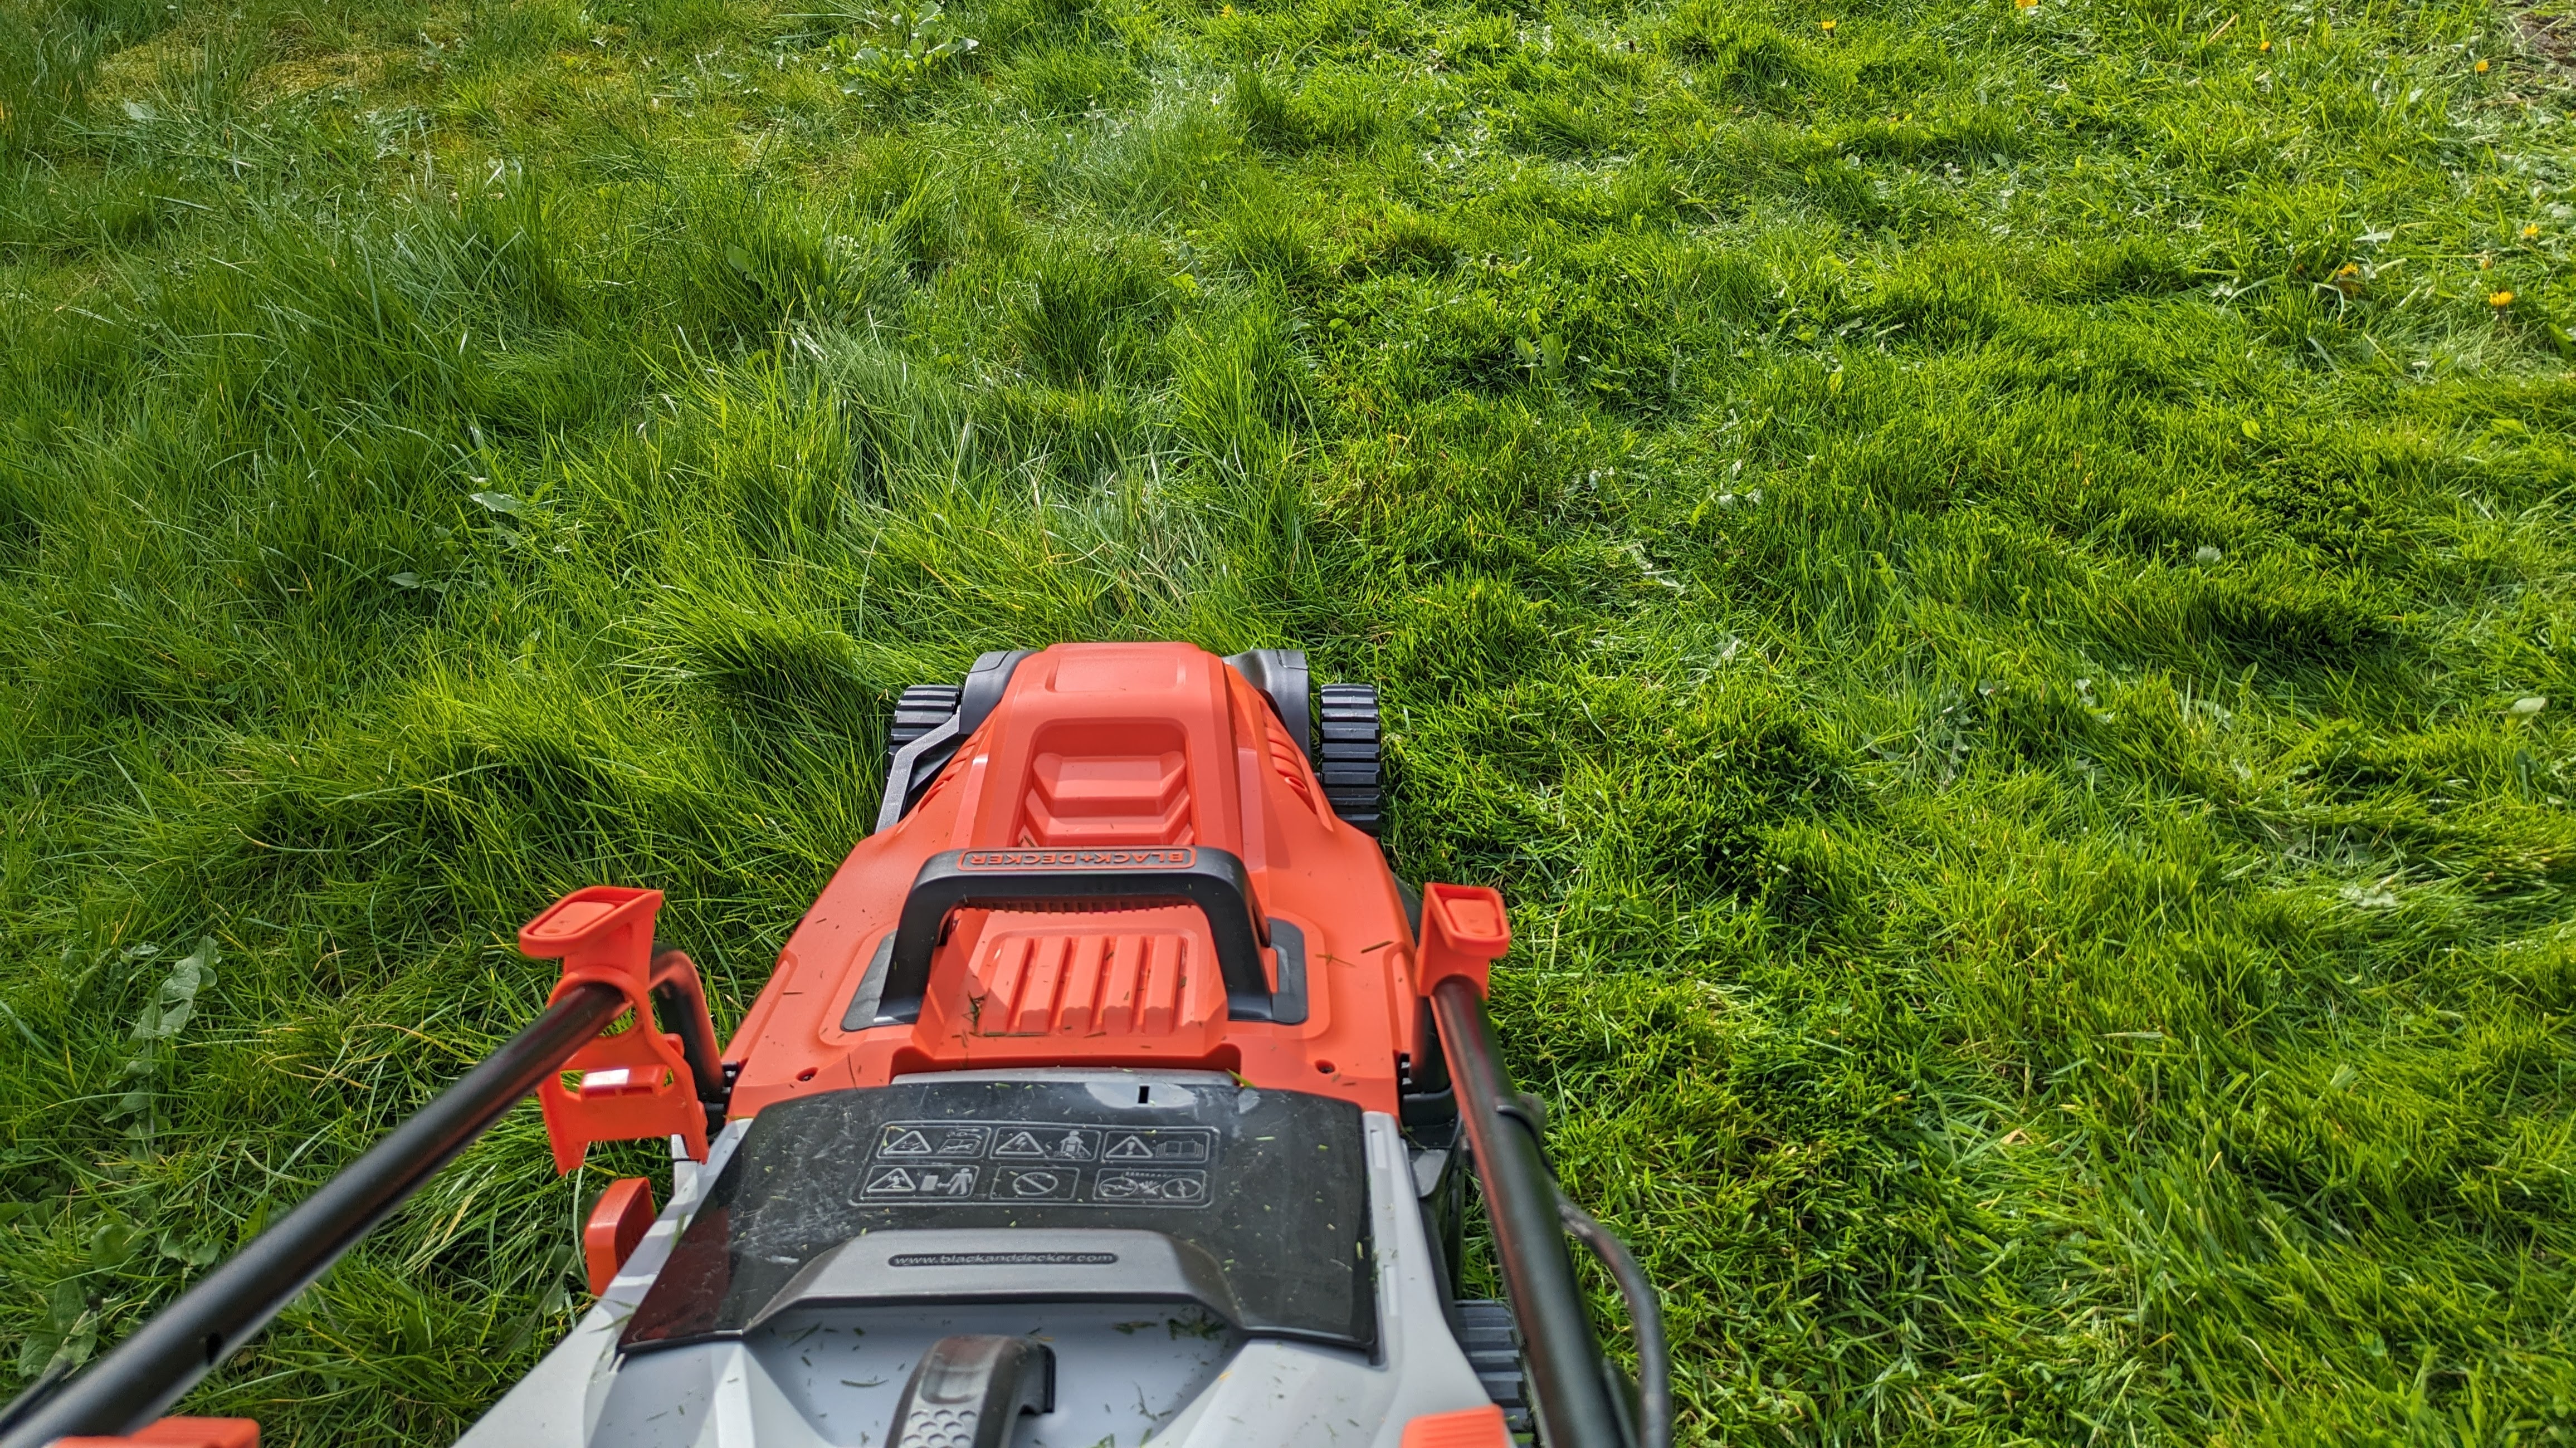 Mowing at the Black + Decker lawn mower's maximum cutting height.